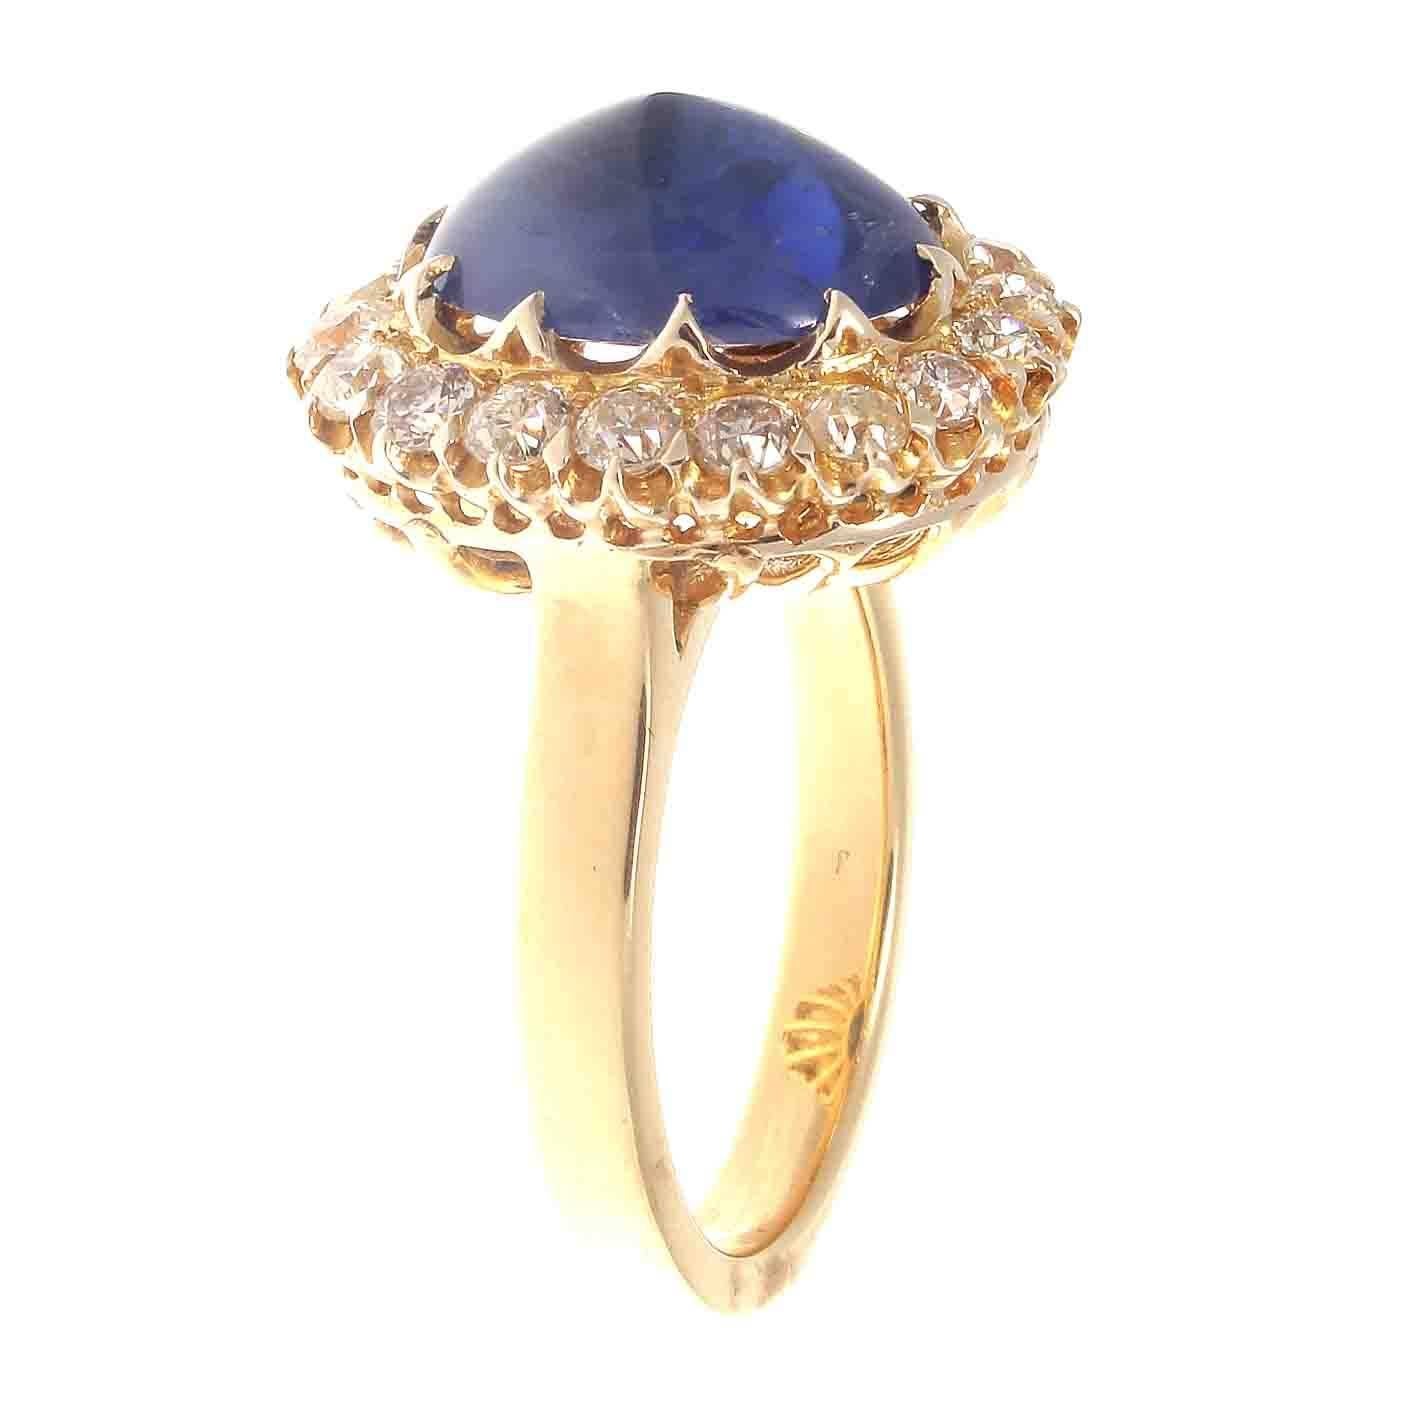 Traditionally, sapphires symbolize nobility, truth, sincerity and faithfulness. During the Middle Ages, the clergy wore blue sapphires to symbolize Heaven, and people thought the gem attracted heavenly blessings. Blue sapphires were also used to